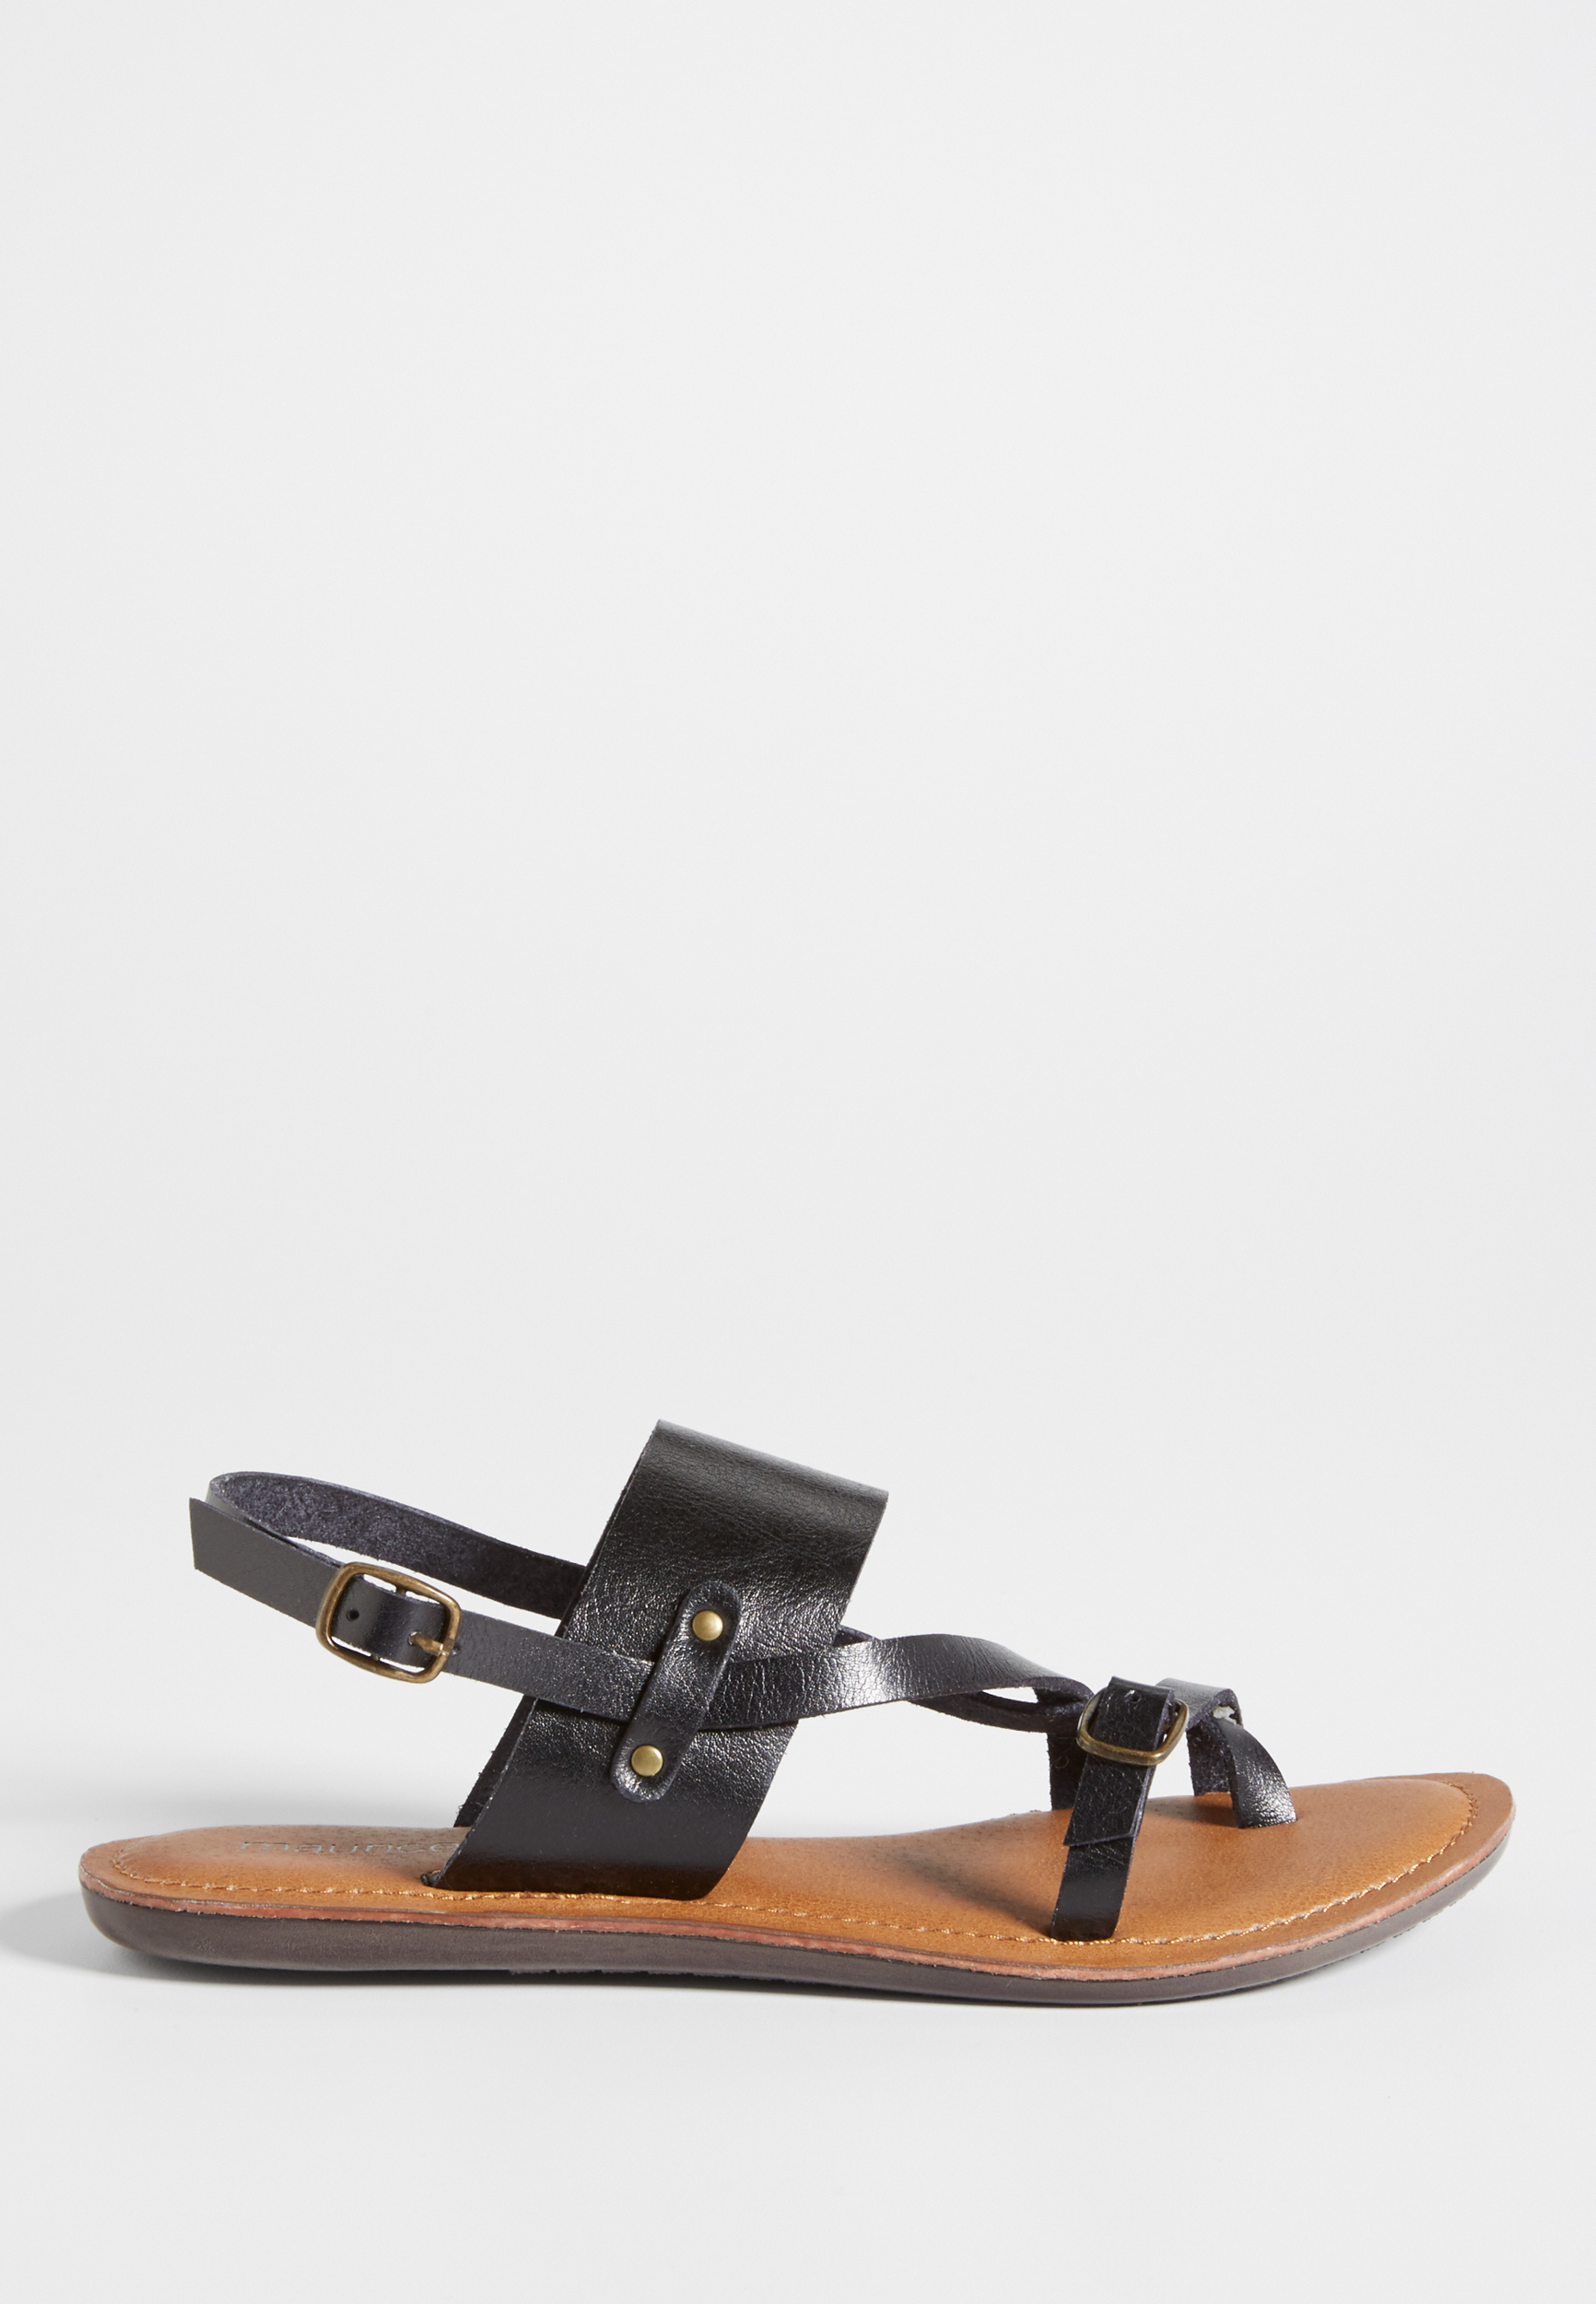 Raine strappy sandal with buckles in black | maurices